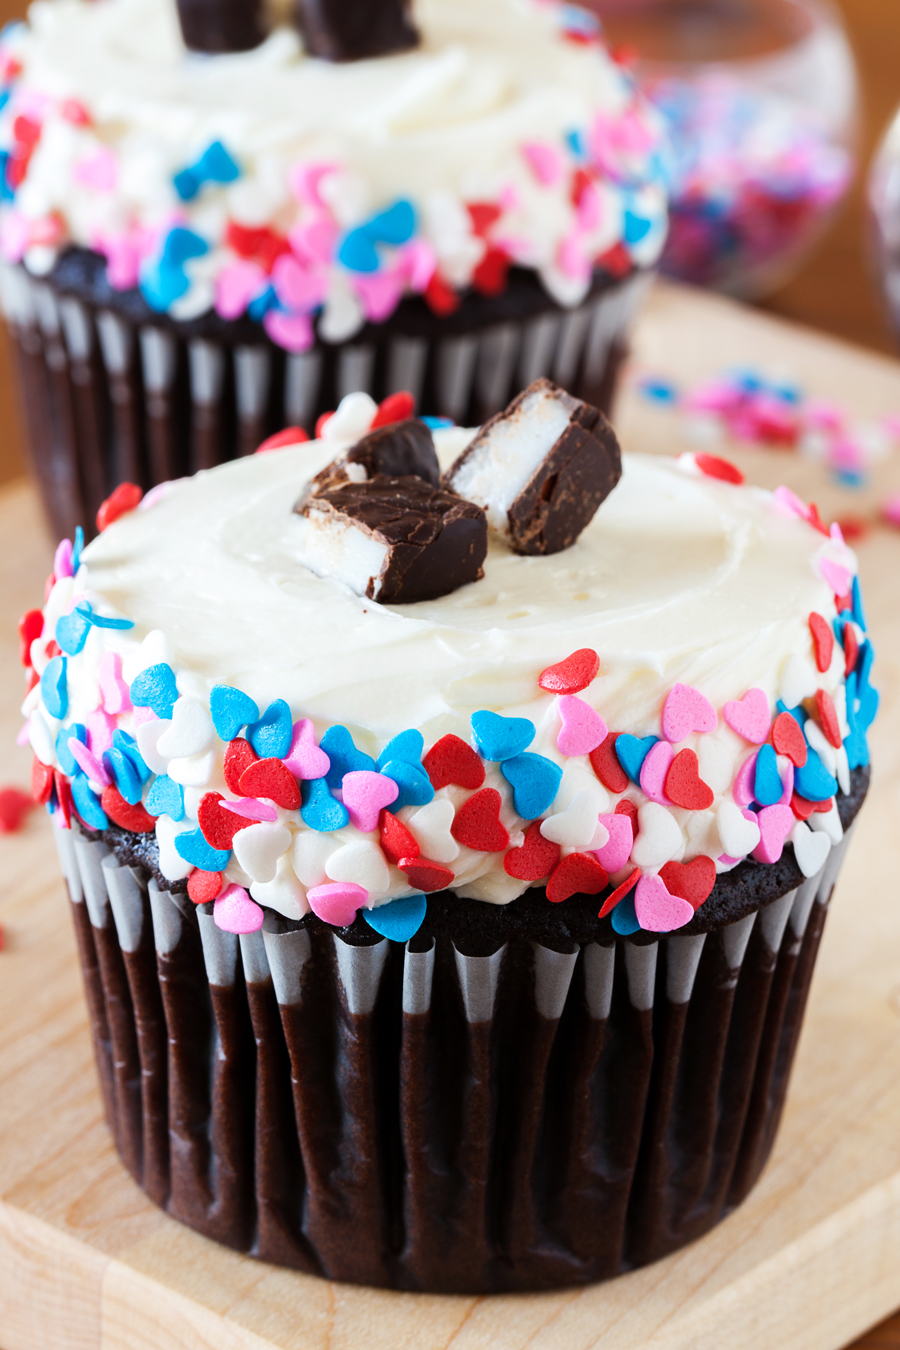 Close-up of two chocolate cupcakes with peppermint frosting and heart sprinkles.